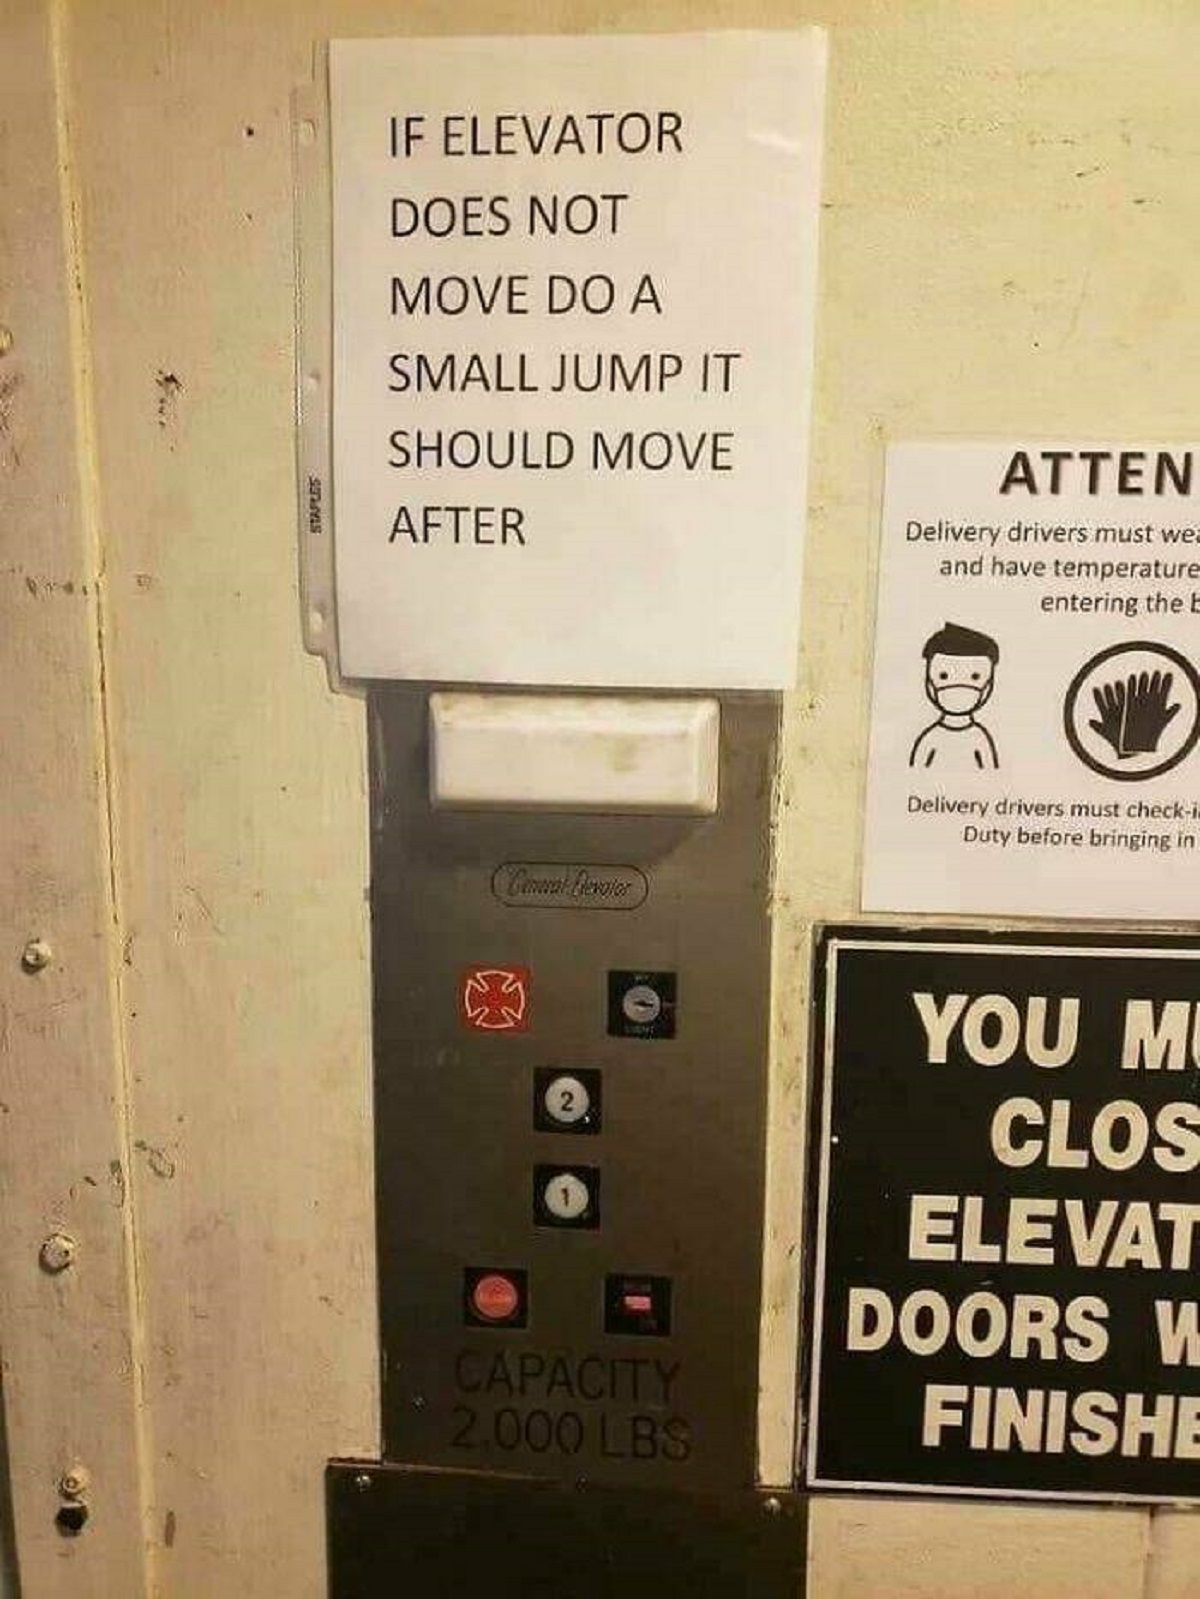 if elevator does not move do a small jump - If Elevator Does Not Move Do A Small Jump It Should Move After Sewyls General Revolor Atten Delivery drivers must wea and have temperature entering the E Delivery drivers must checki Duty before bringing in Sign